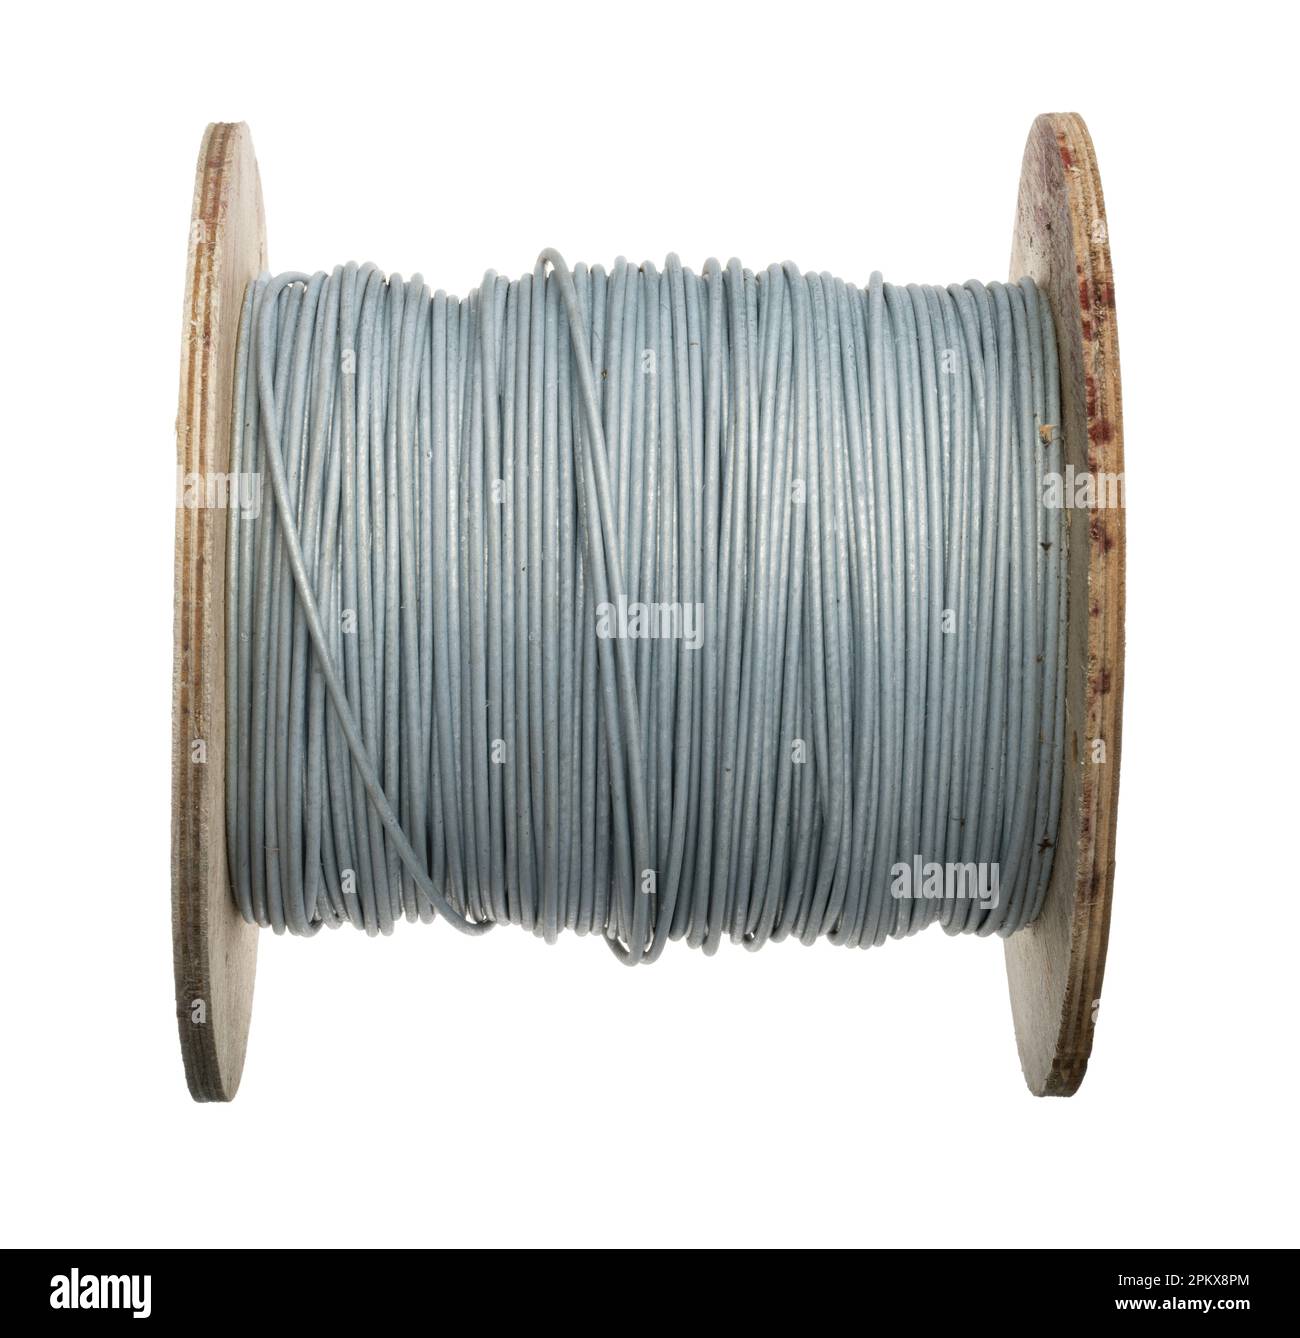 A coil of fence wire. Thick gauge galvanised metal wire. Stock fencing wire on a reel or small drum. Stock Photo